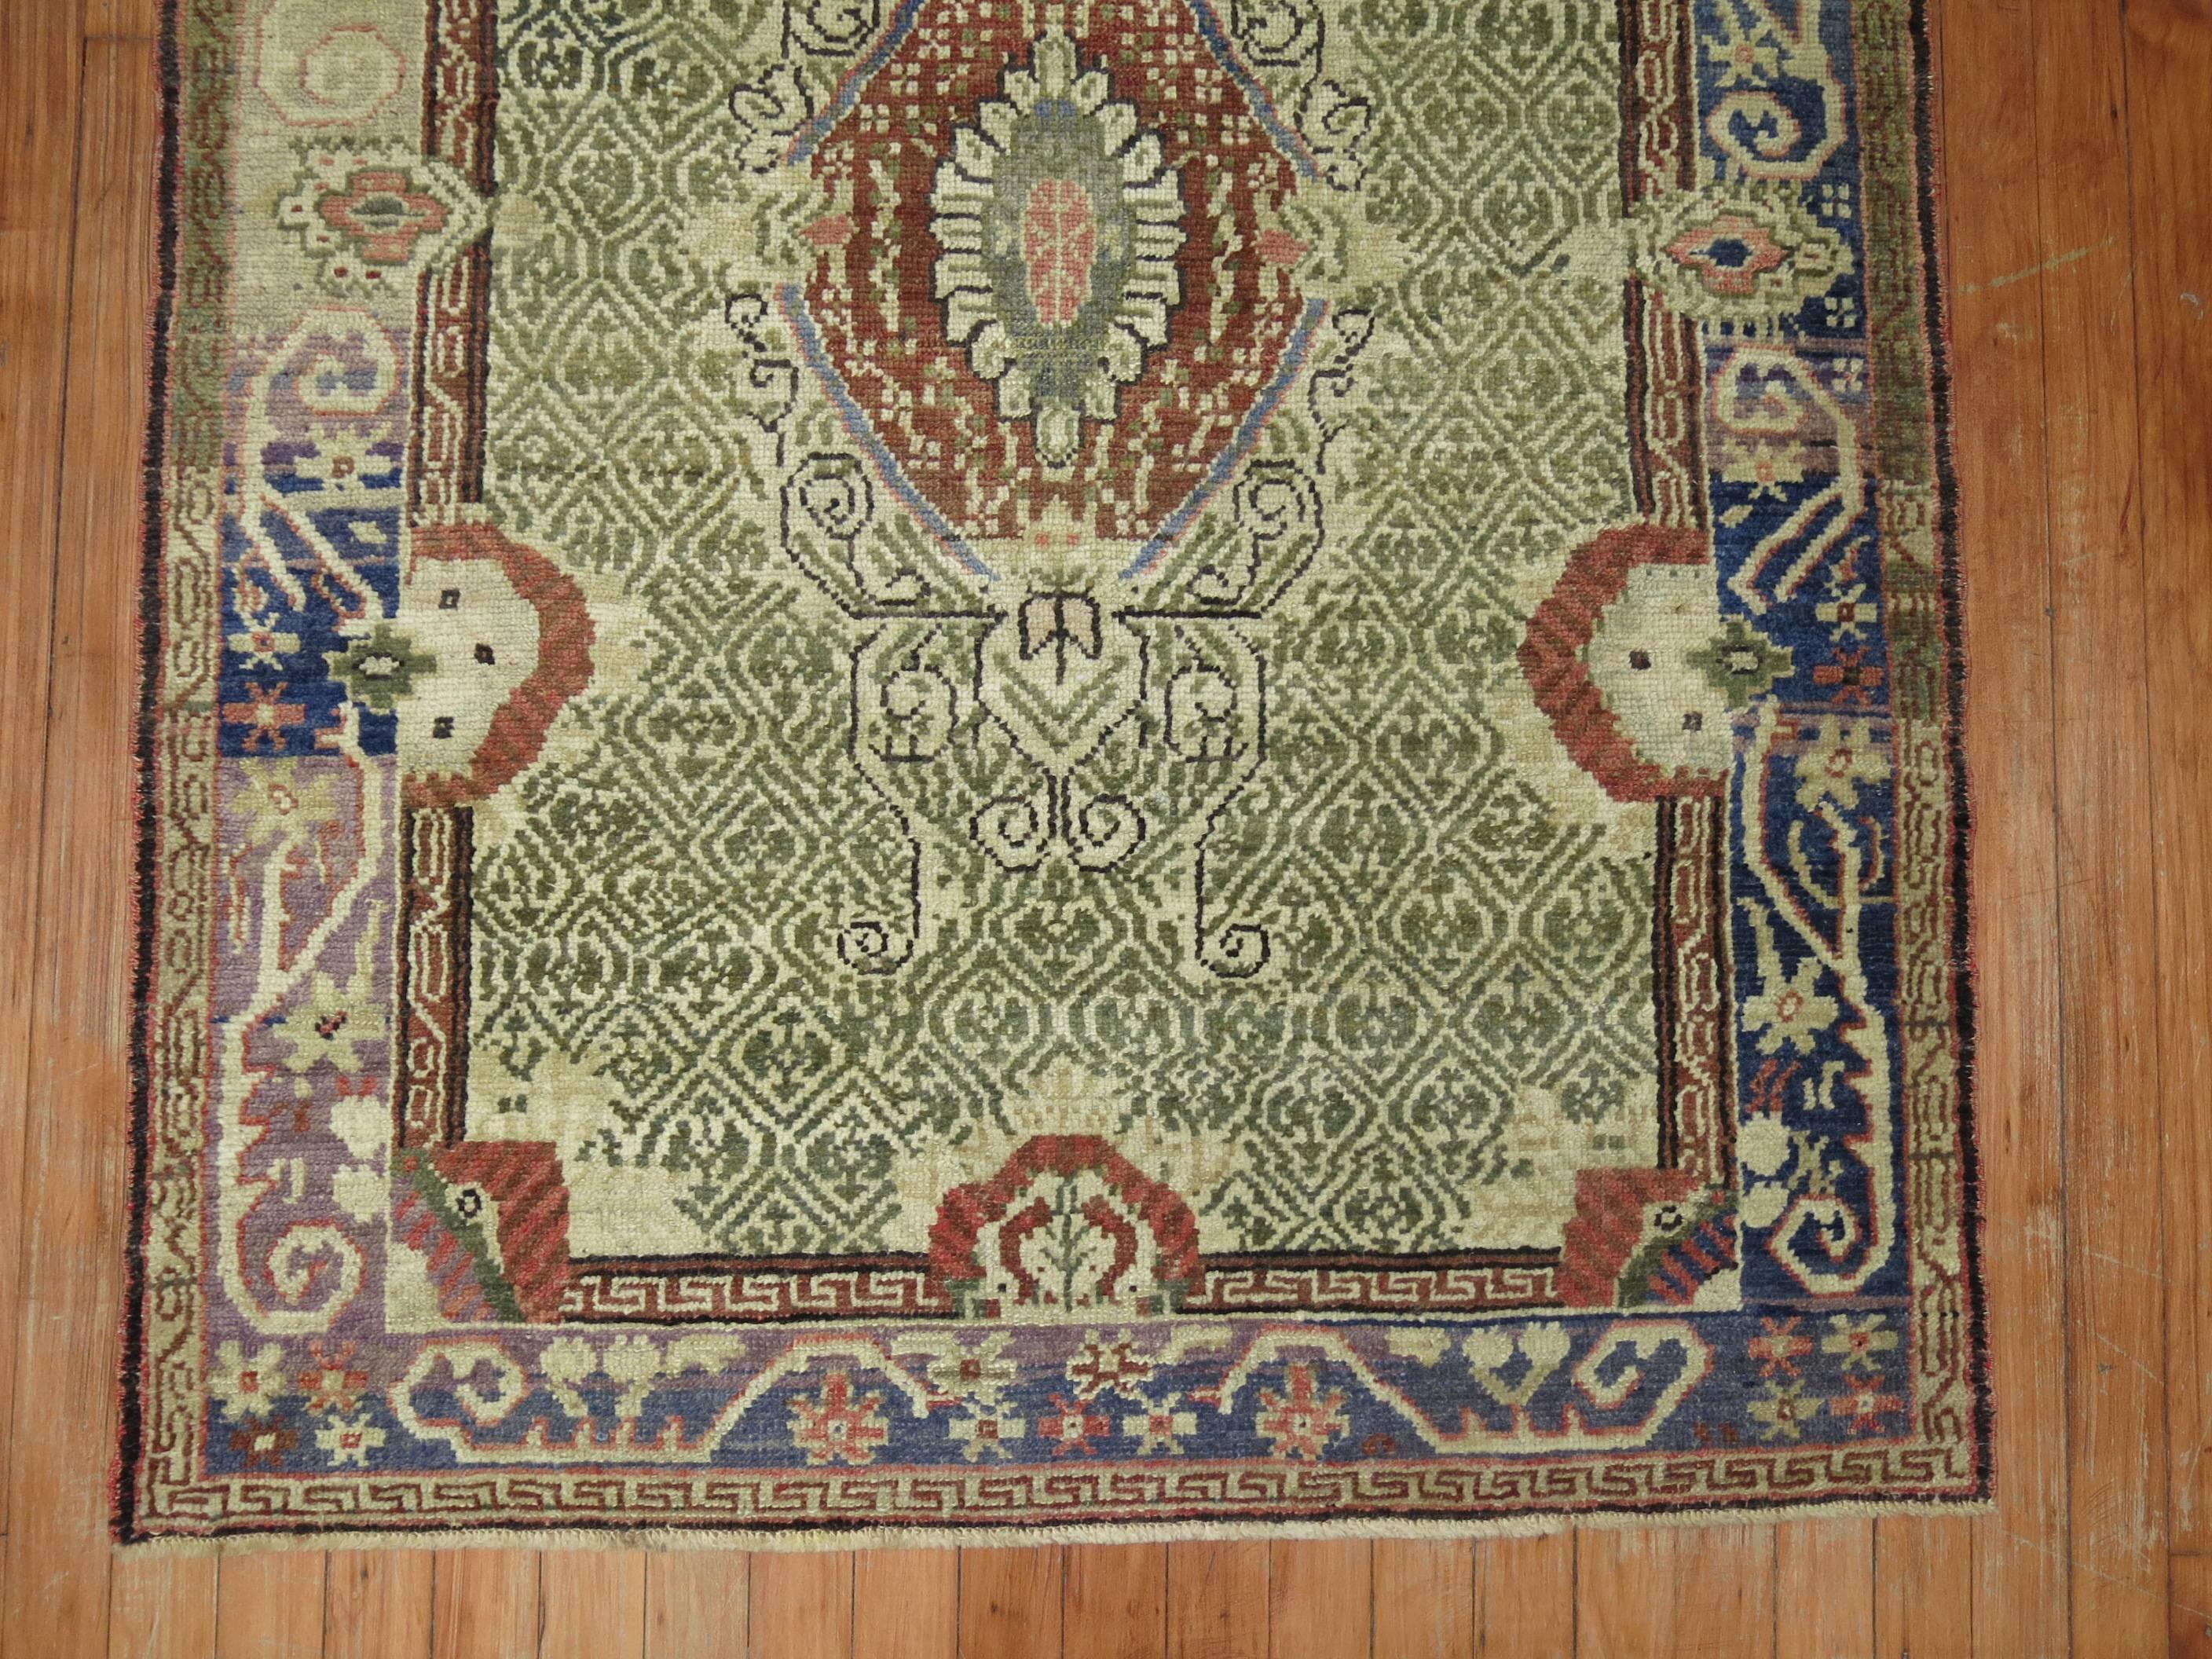 A Turkigh Ghiordes knot rug in predominant earth shades in brown, blue and green.